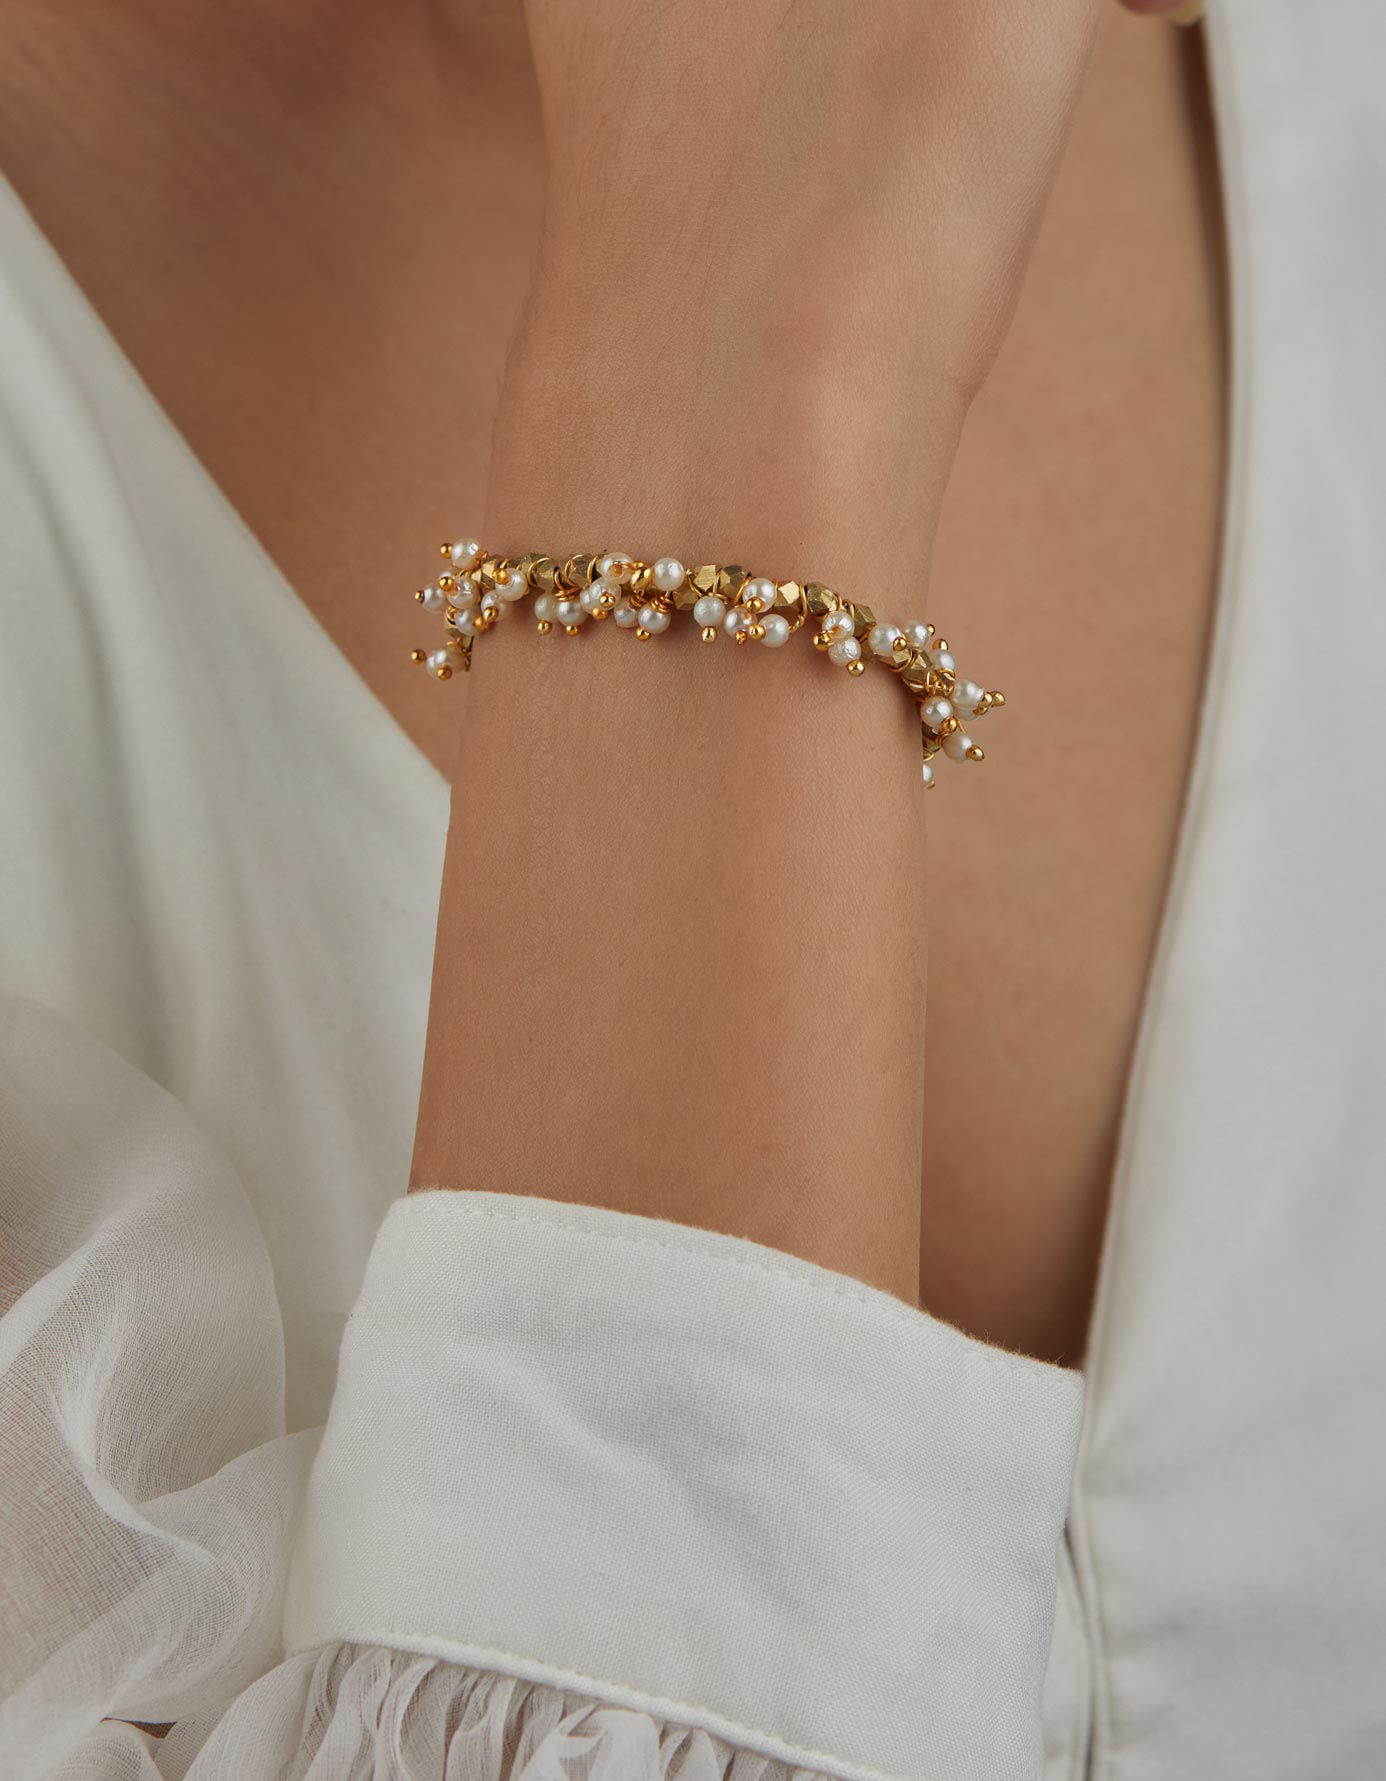 Mini Nugget Pearl Beaded Bracelet in 18k Gold Vermeil on Sterling Silver  and Pearl | Jewellery by Monica Vinader